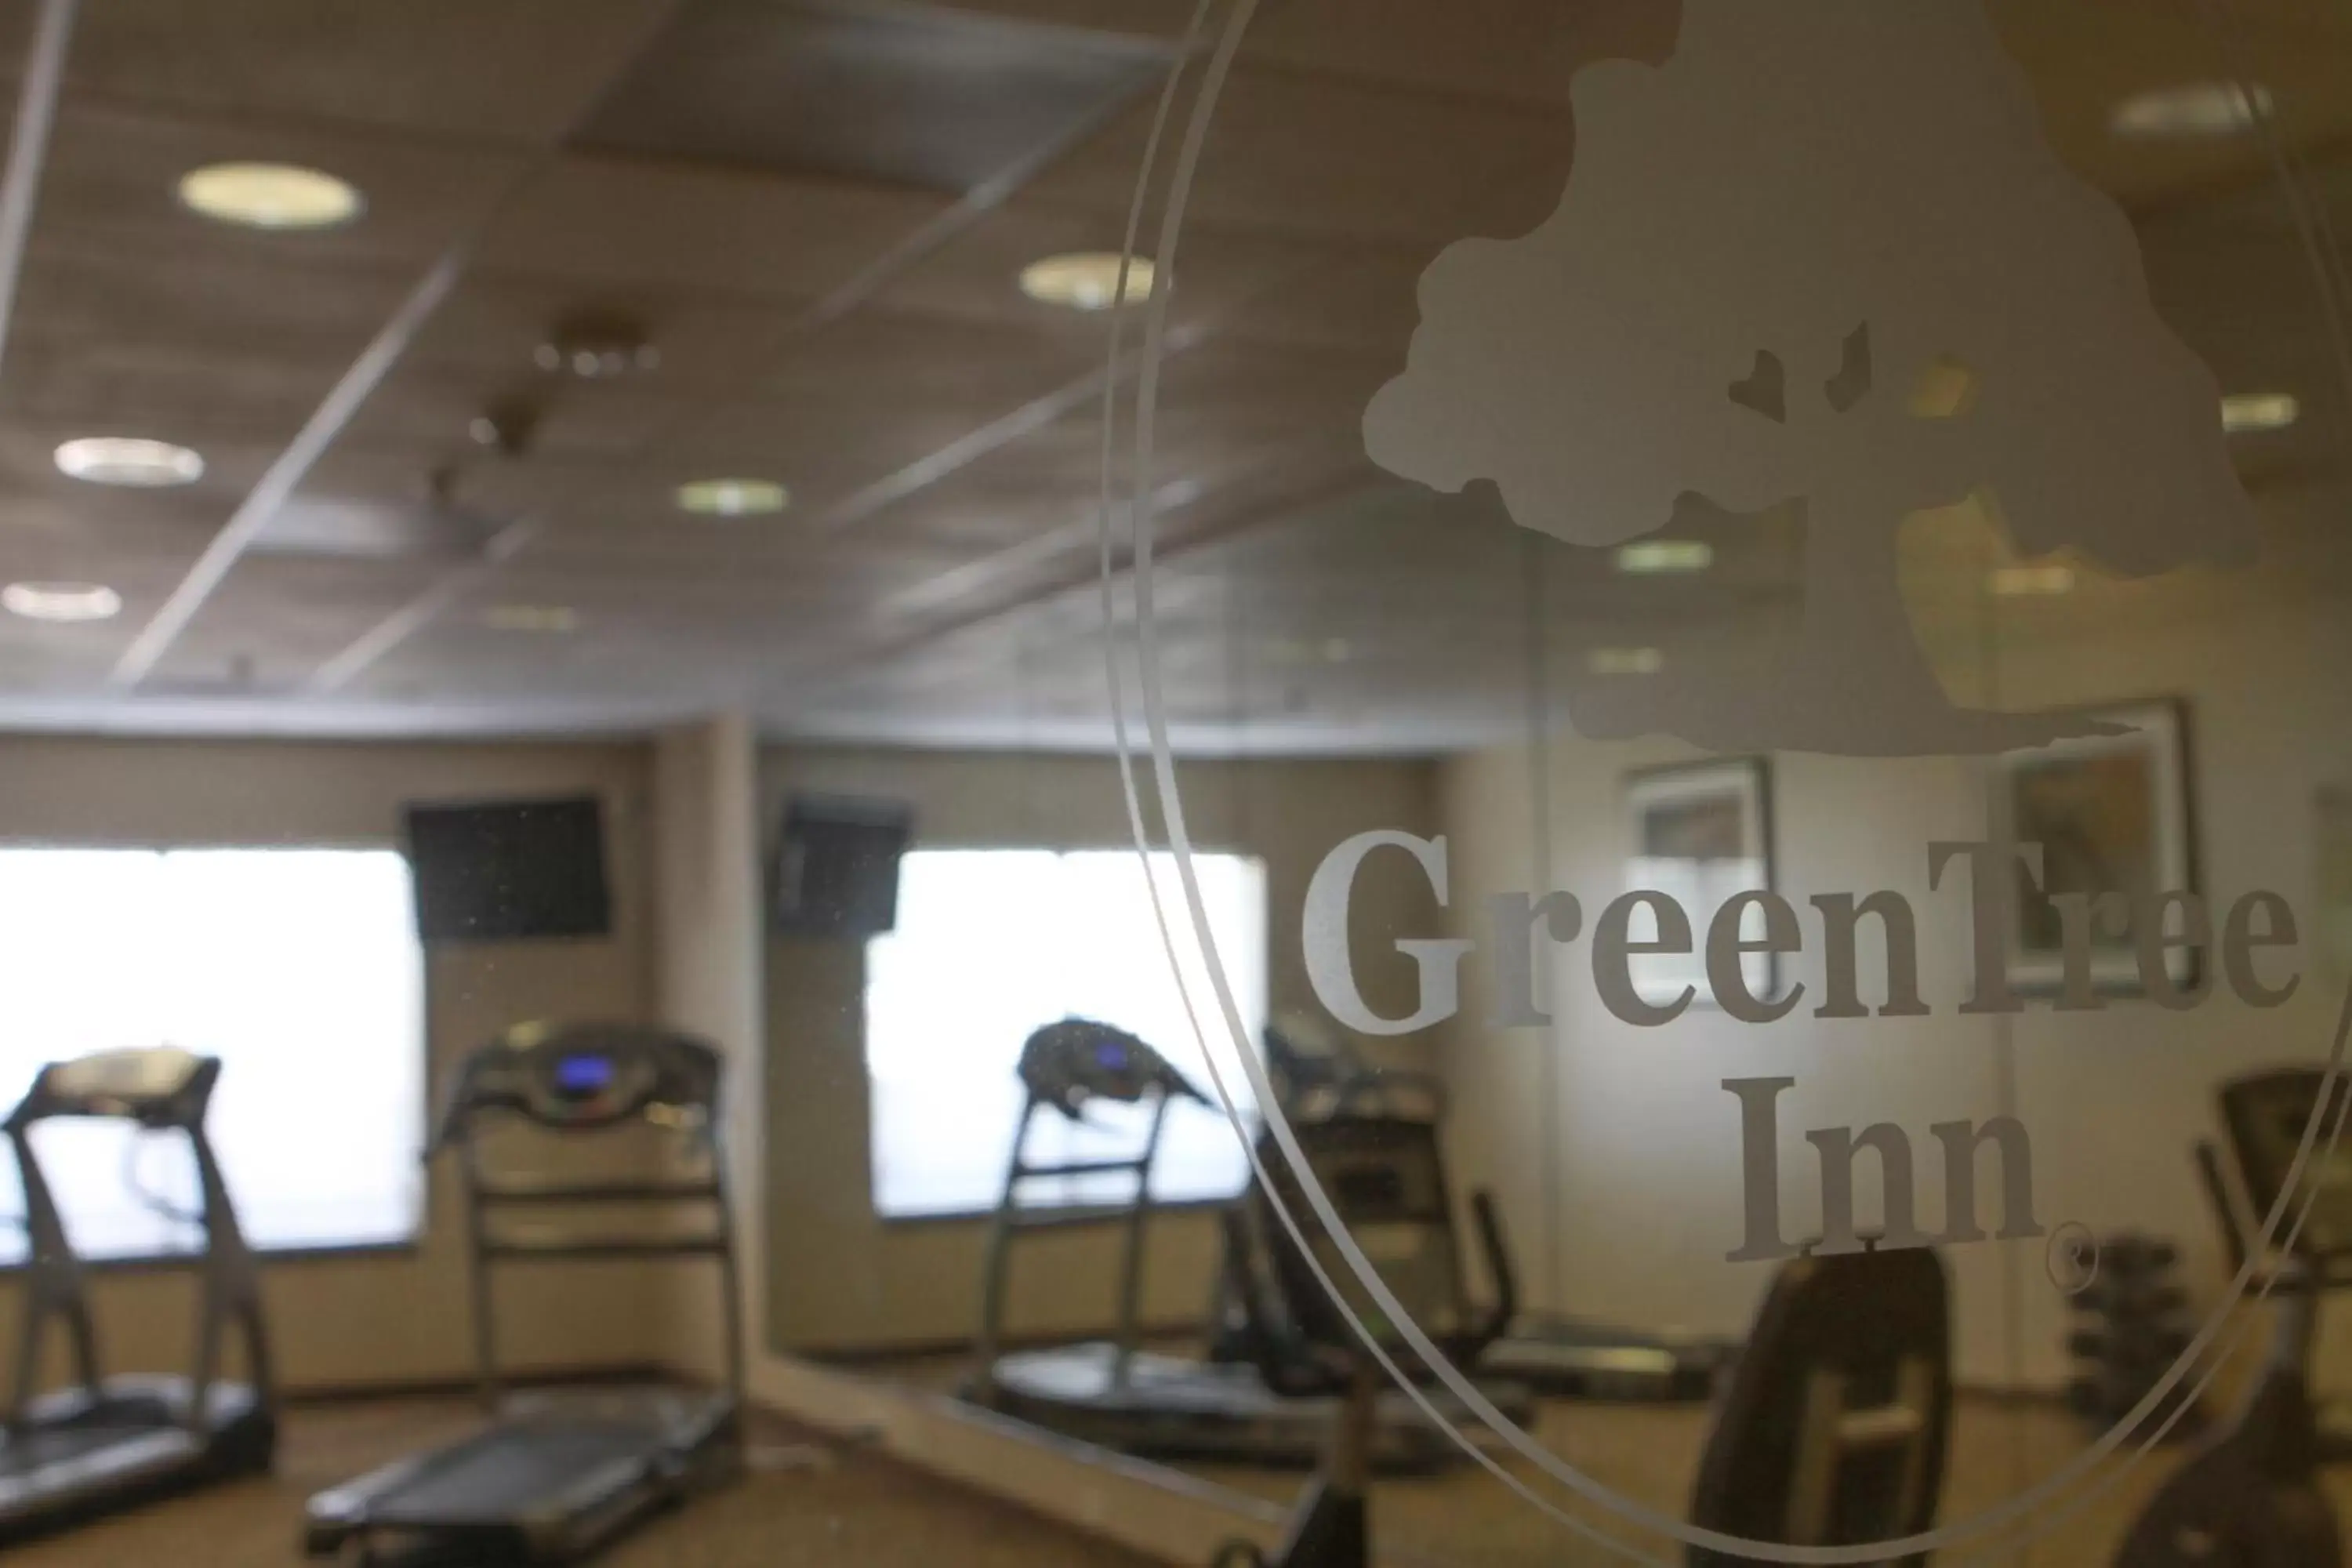 Fitness centre/facilities in GreenTree Inn and Suites Florence, AZ